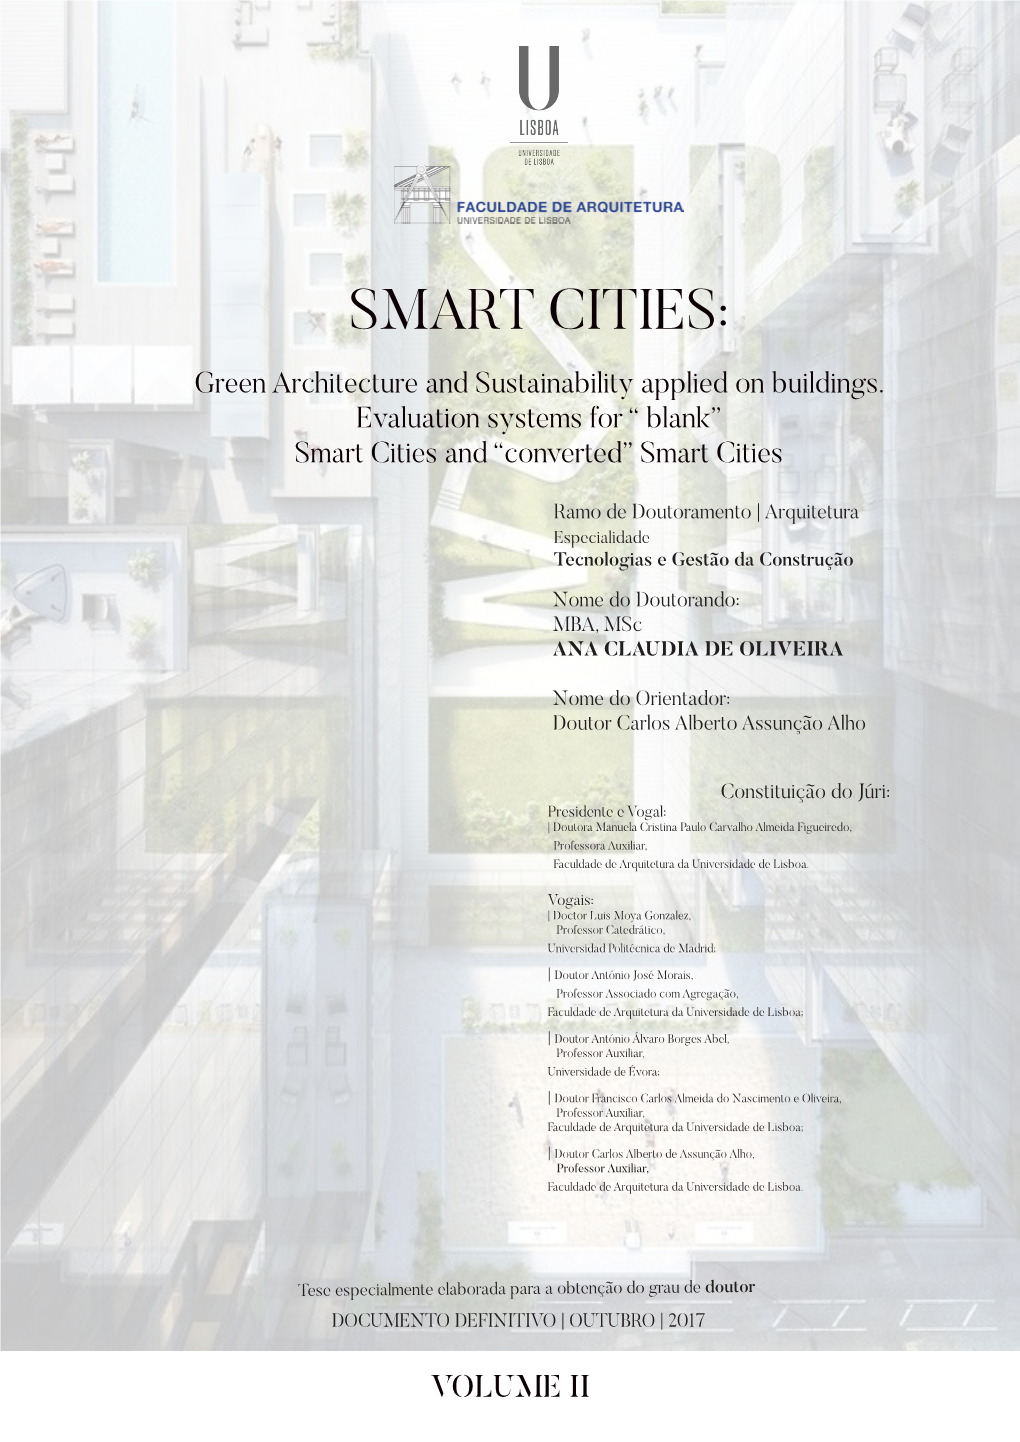 SMART CITIES: Green Architecture and Sustainability Applied on Buildings